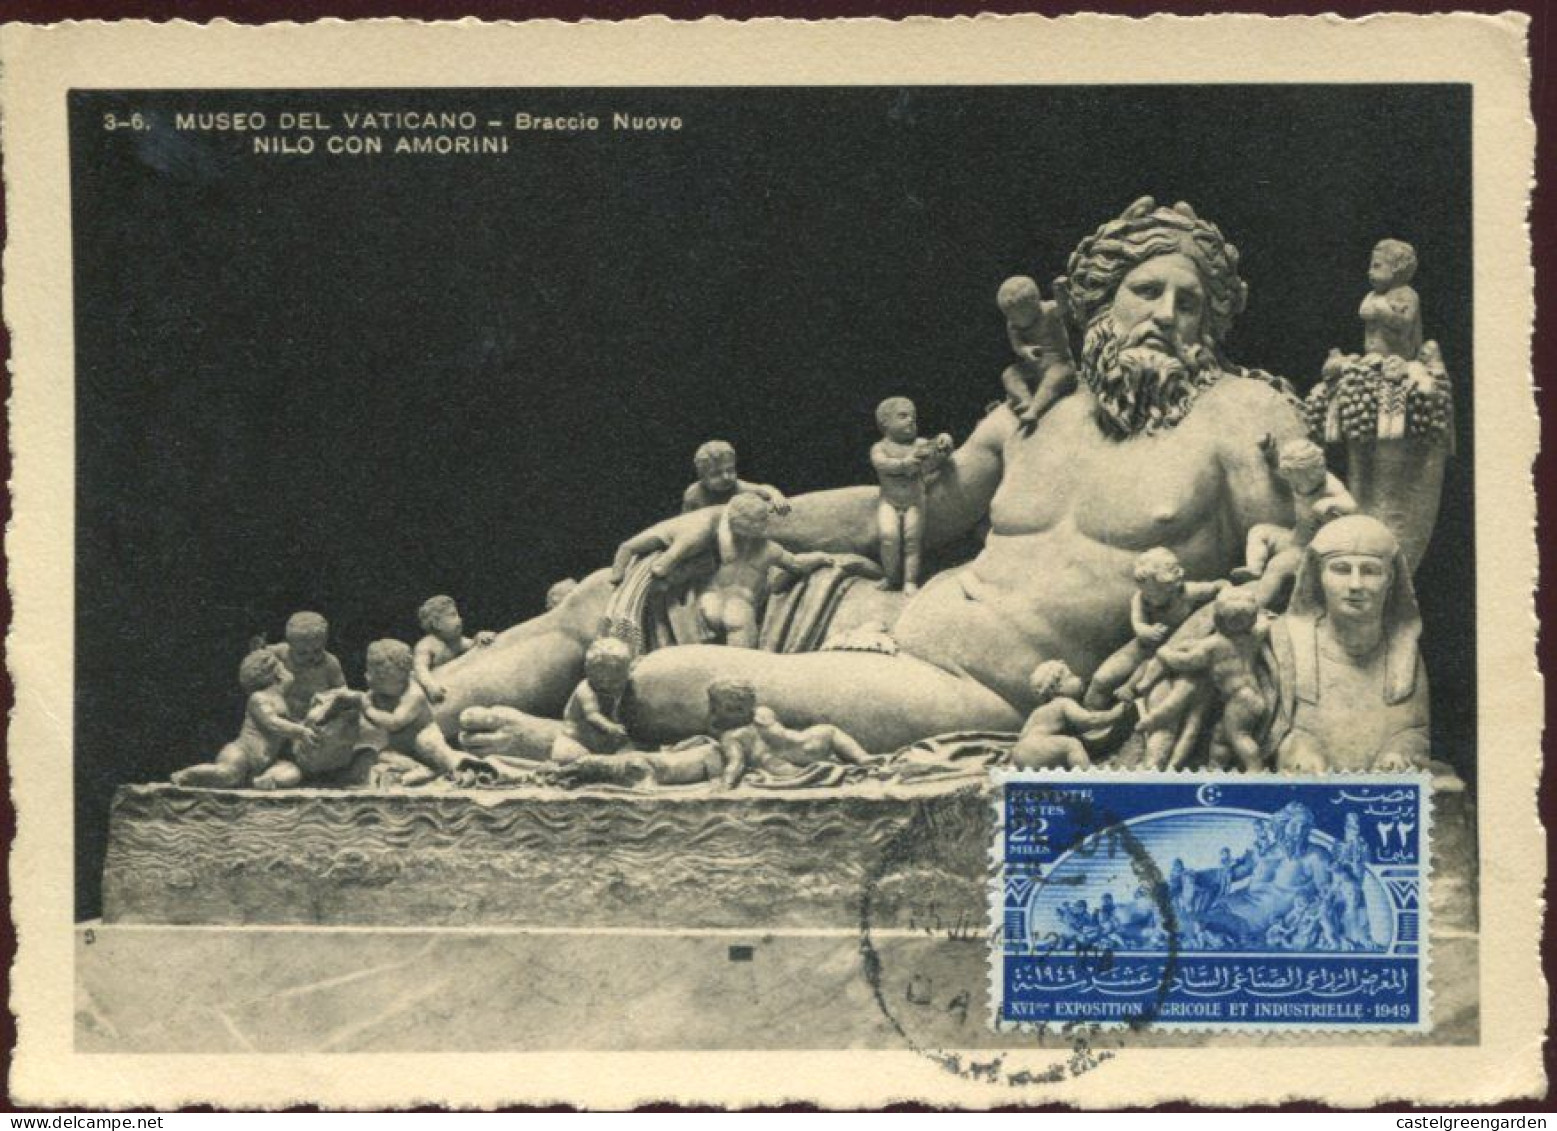 X0507 Egypt,maximum Card 1949 Agricoltural Exhibition,showing The Sculpture Of God "NILO" Vintage Card - Archaeology